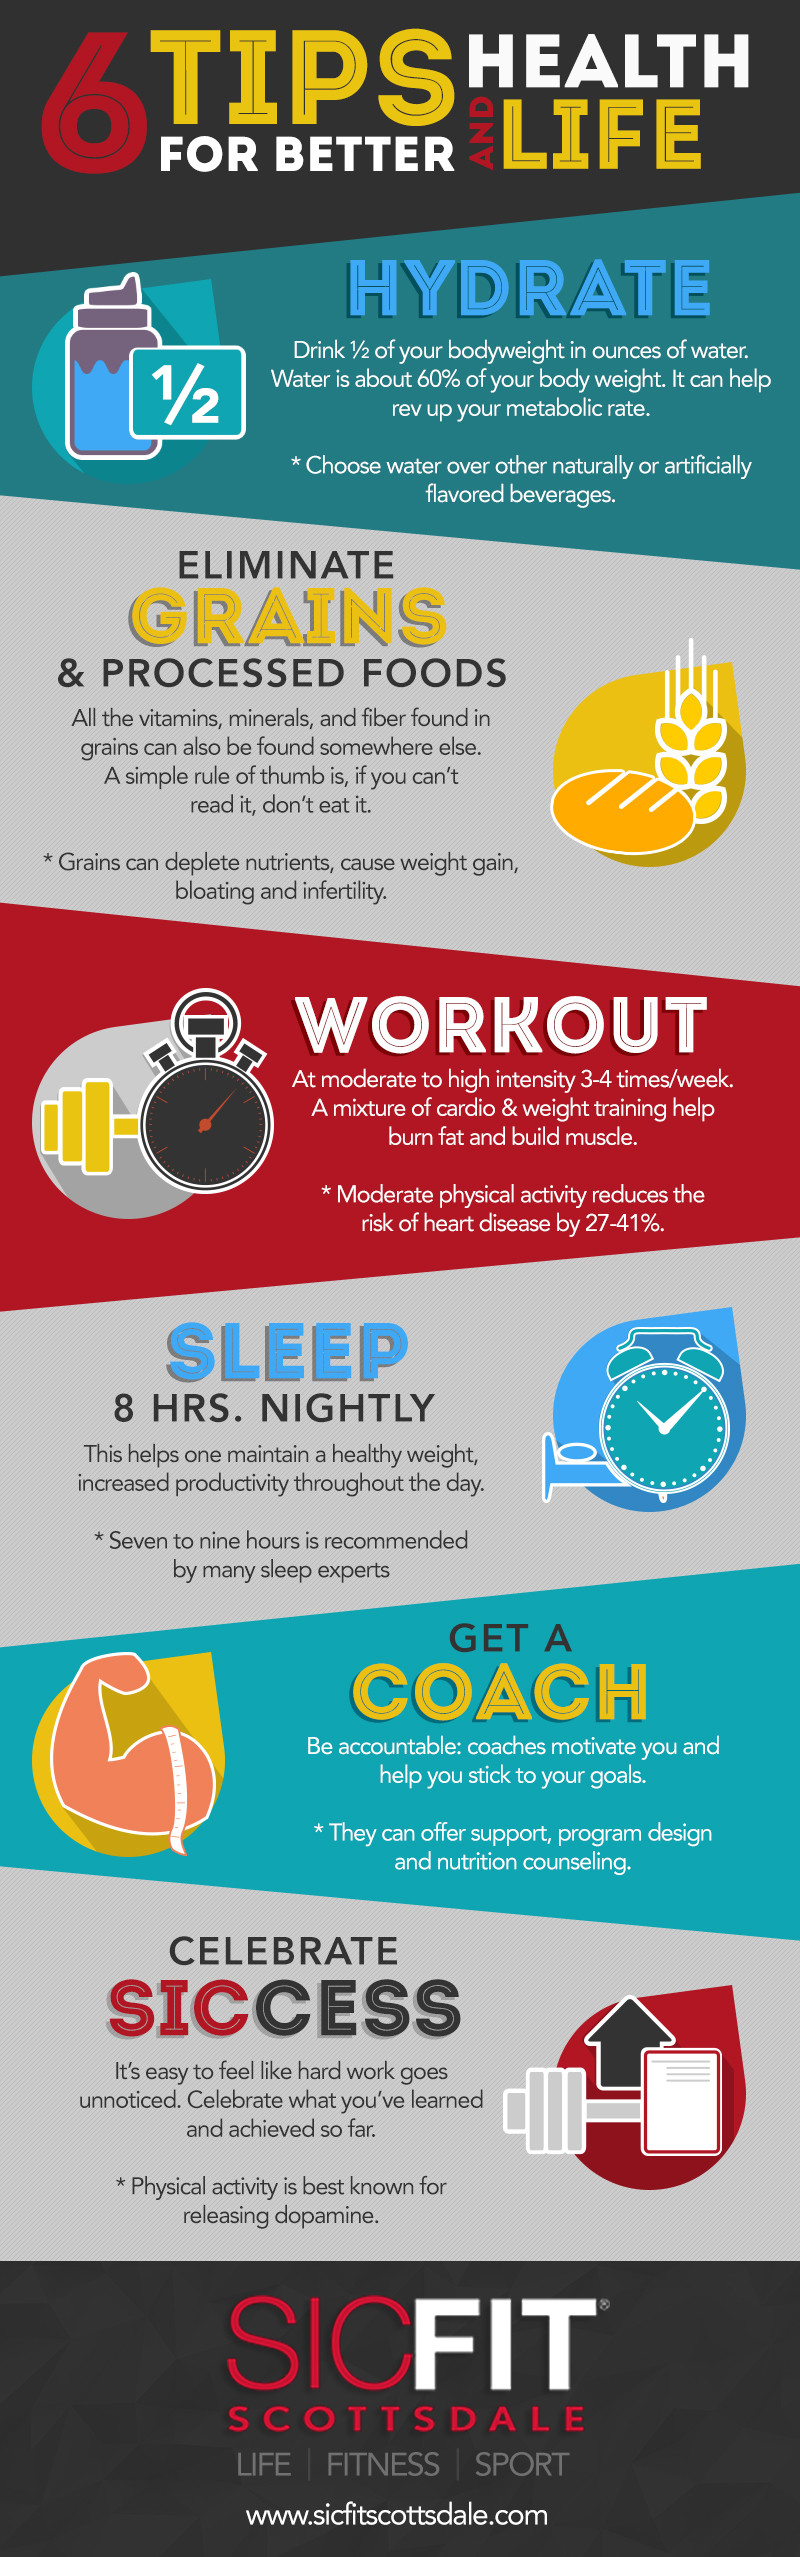 10 Tips for a Healthy Lifestyle [INFOGRAPHIC]